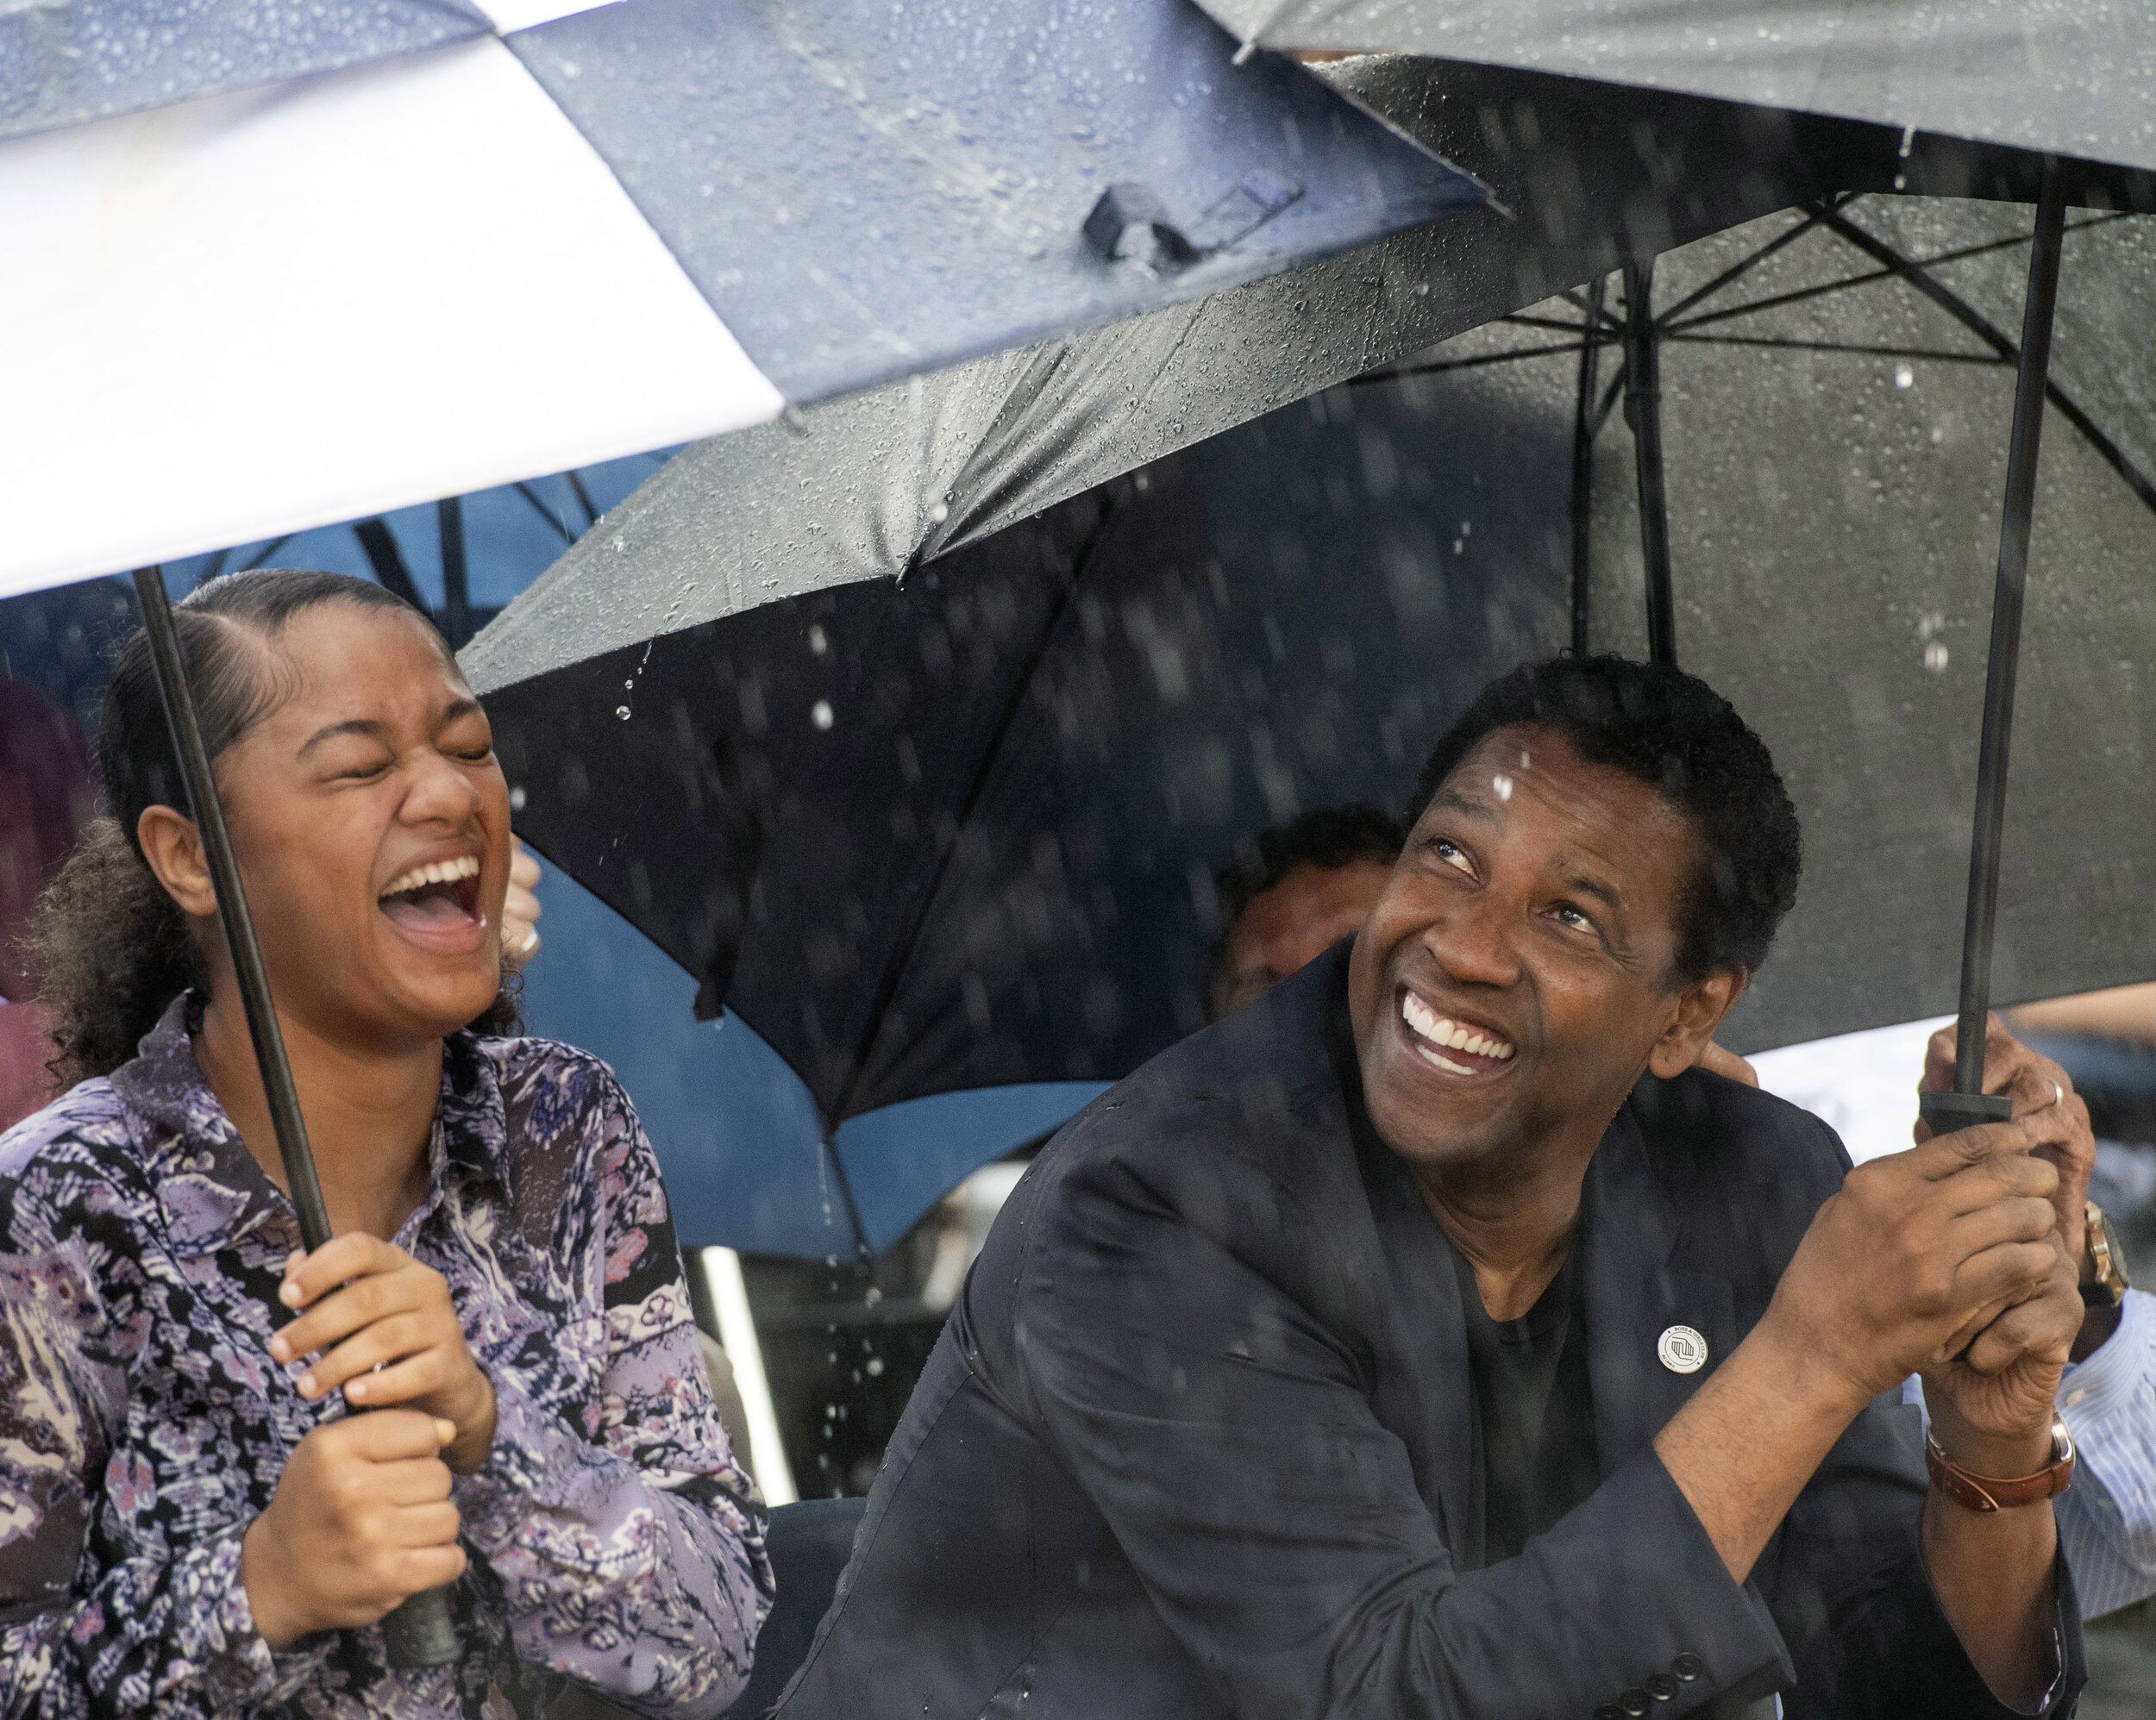  Jamaica Johnson, an 11th-grader at Pittsburgh CAPA, and Denzel Washington share a moment during a "groundblessing" at the August Wilson House on Wednesday,when the actor announced $5 million in support of the projects at the playwright's childhood h